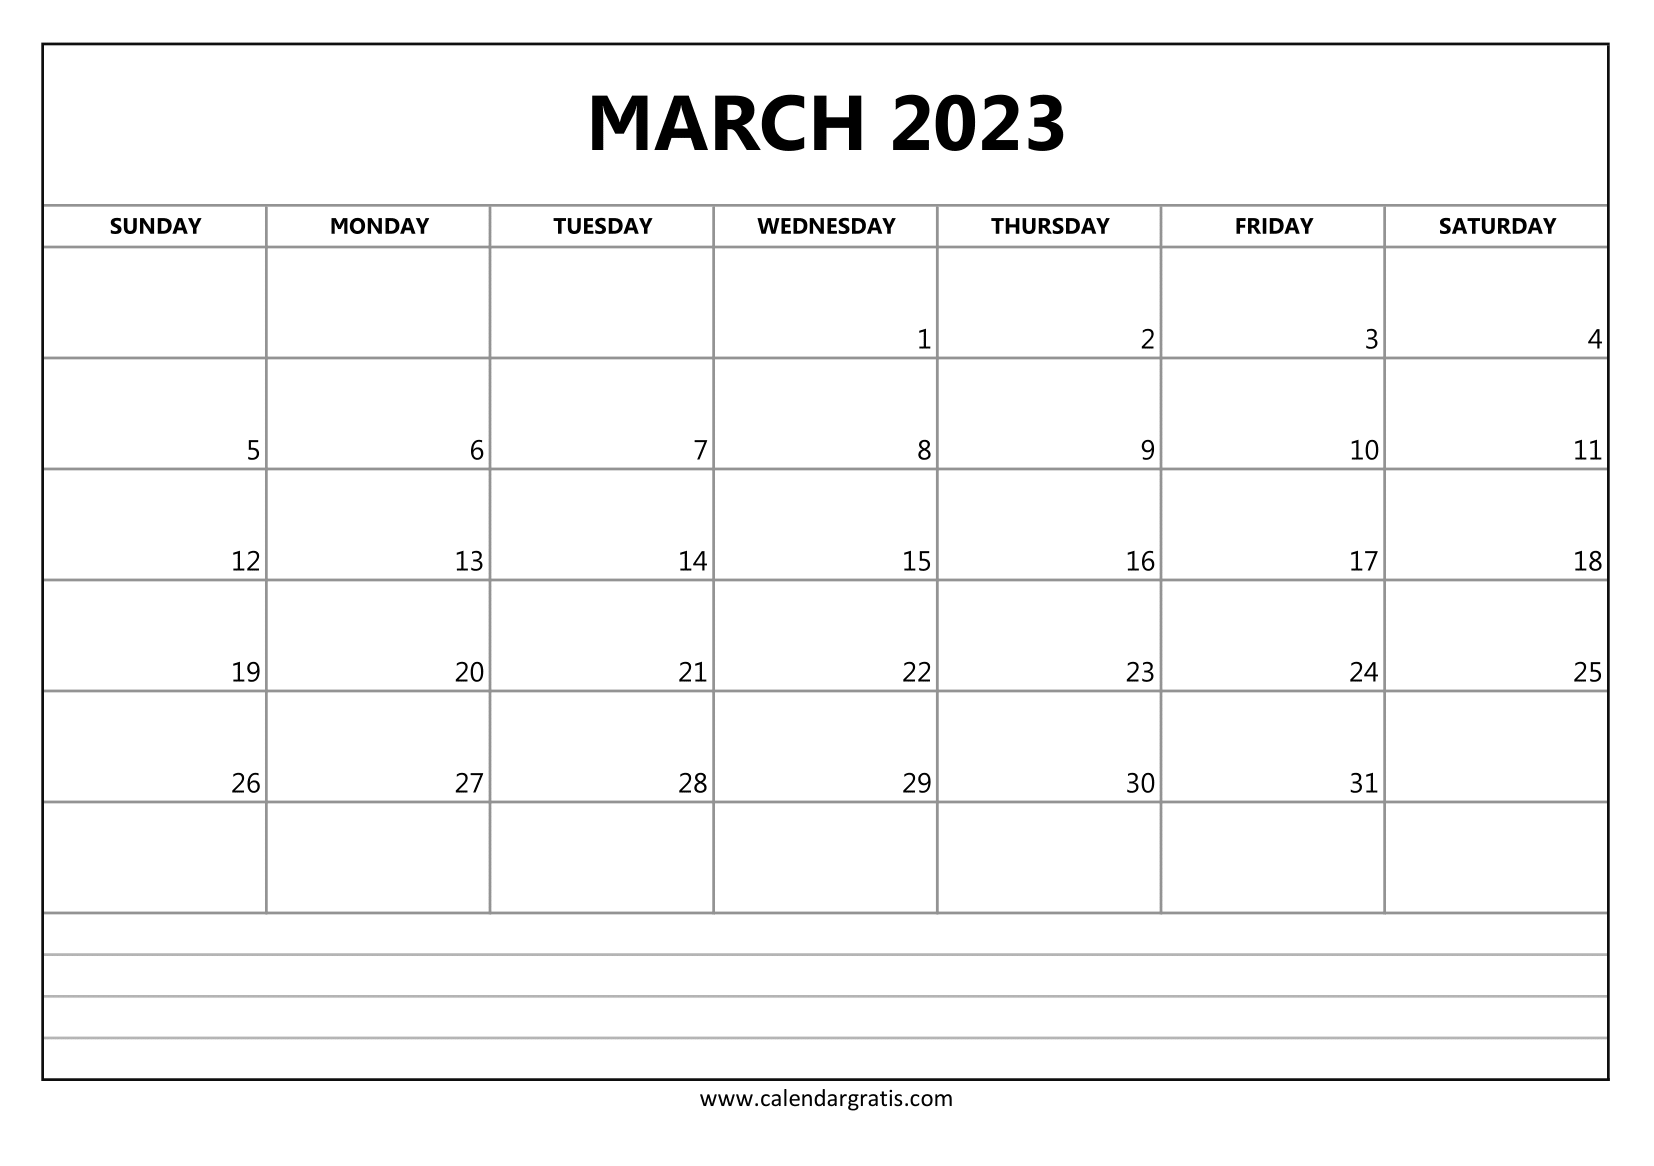 Download Free March 2023 calendar printable with notes and lines for students, teachers, office, and business.